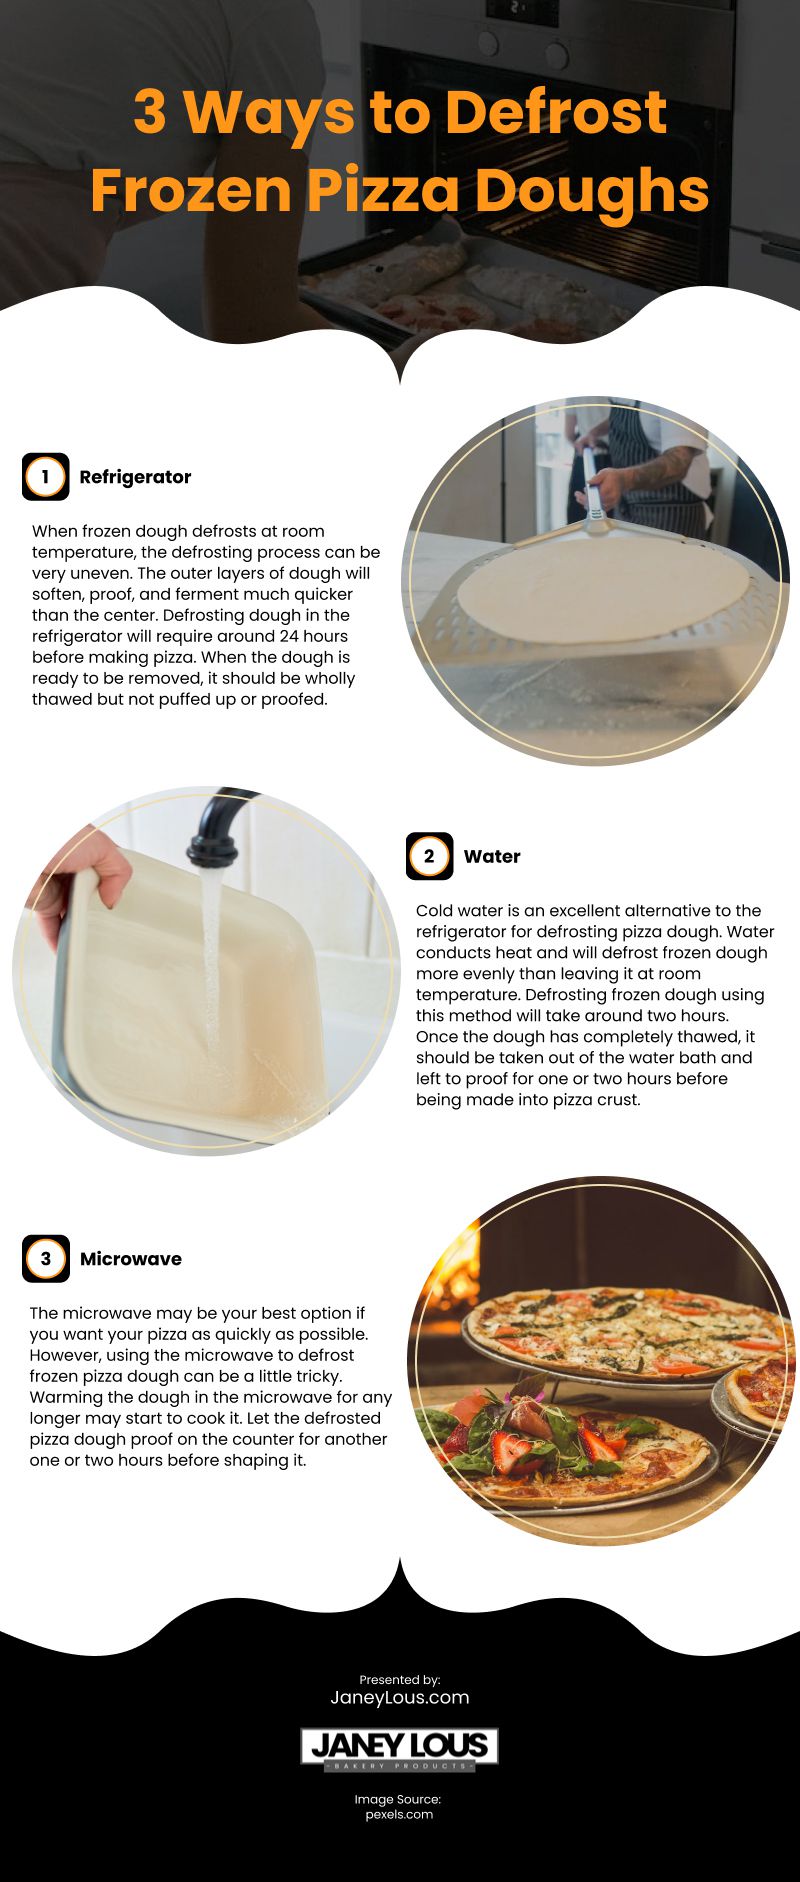 3 Ways to Defrost Frozen Pizza Doughs Infographic